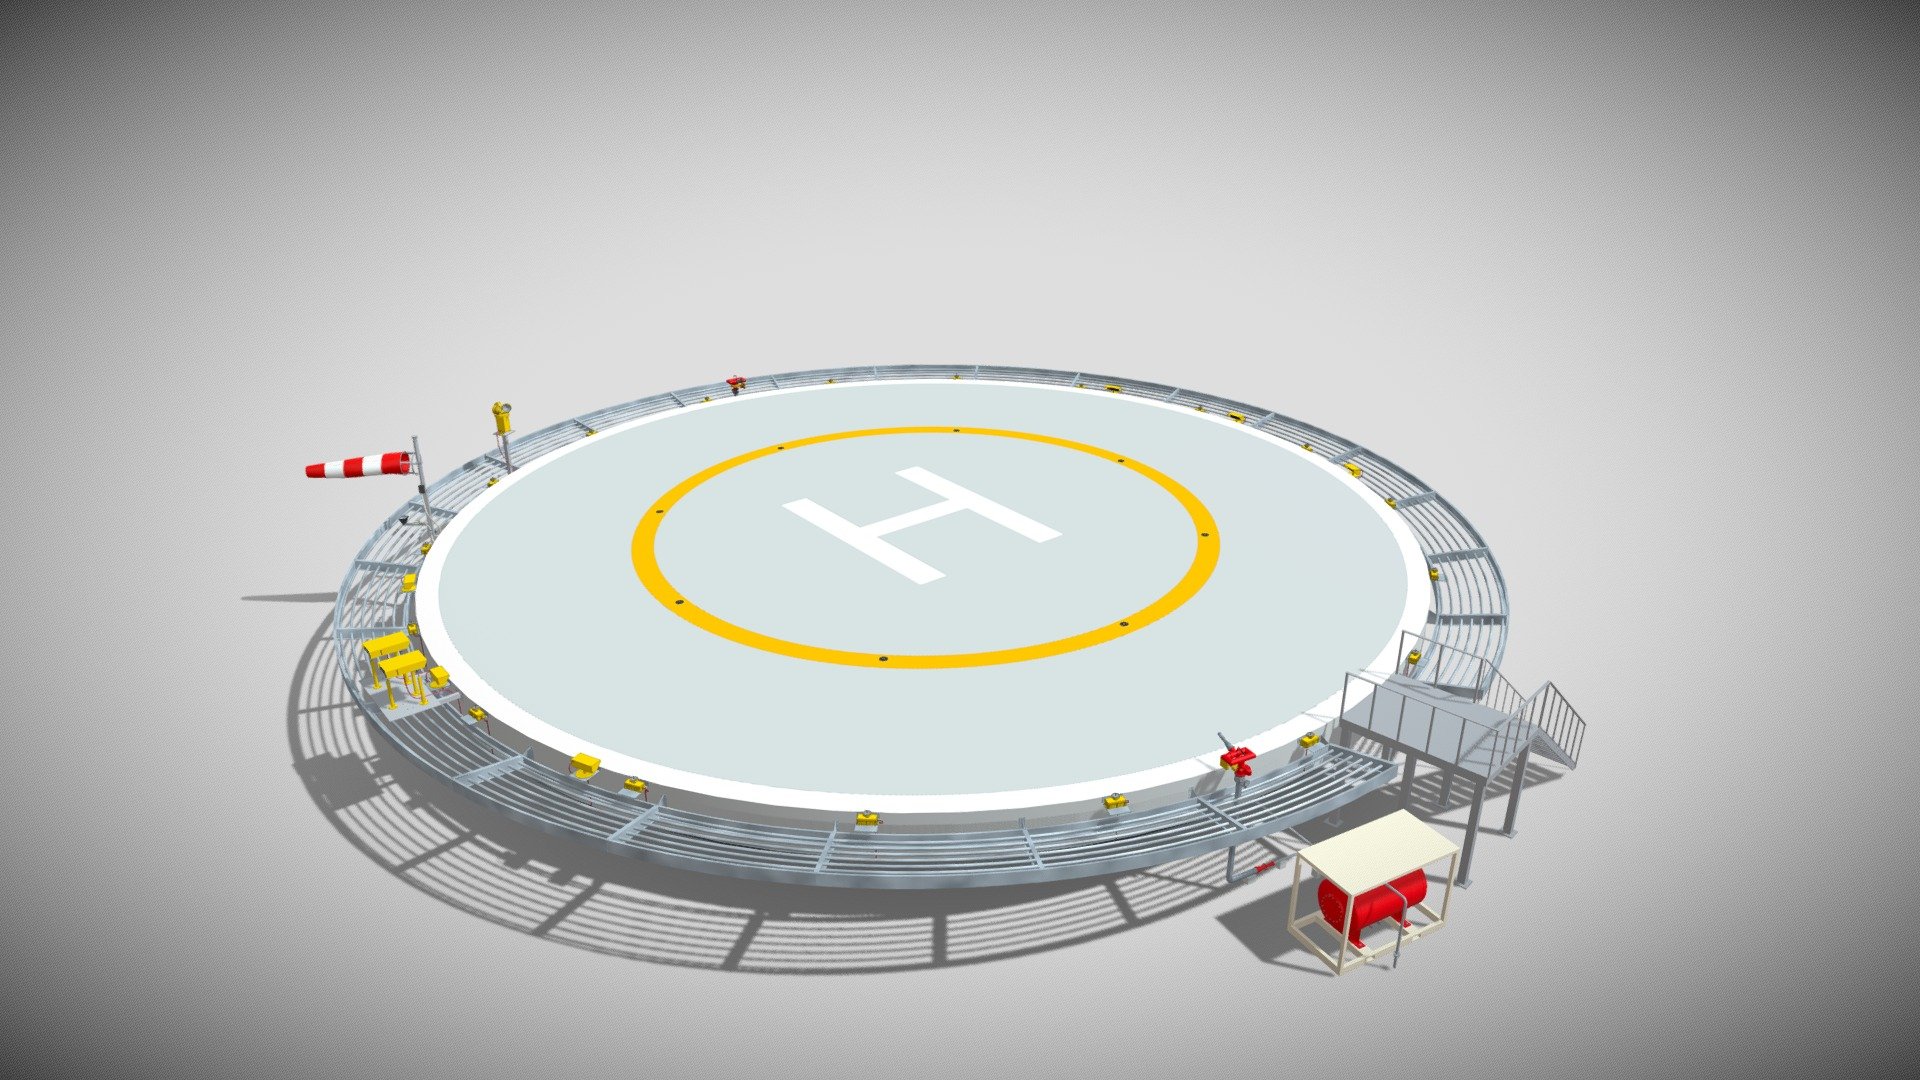 Detailed model of a Circular Heliport, modeled in Cinema 4D.The model was created using approximate real world dimensions.

The model has 647,872 polys and 629,611 vertices.

An additional file has been provided containing the original Cinema 4D project files, textures and other 3d export files such as 3ds, fbx and obj 3d model